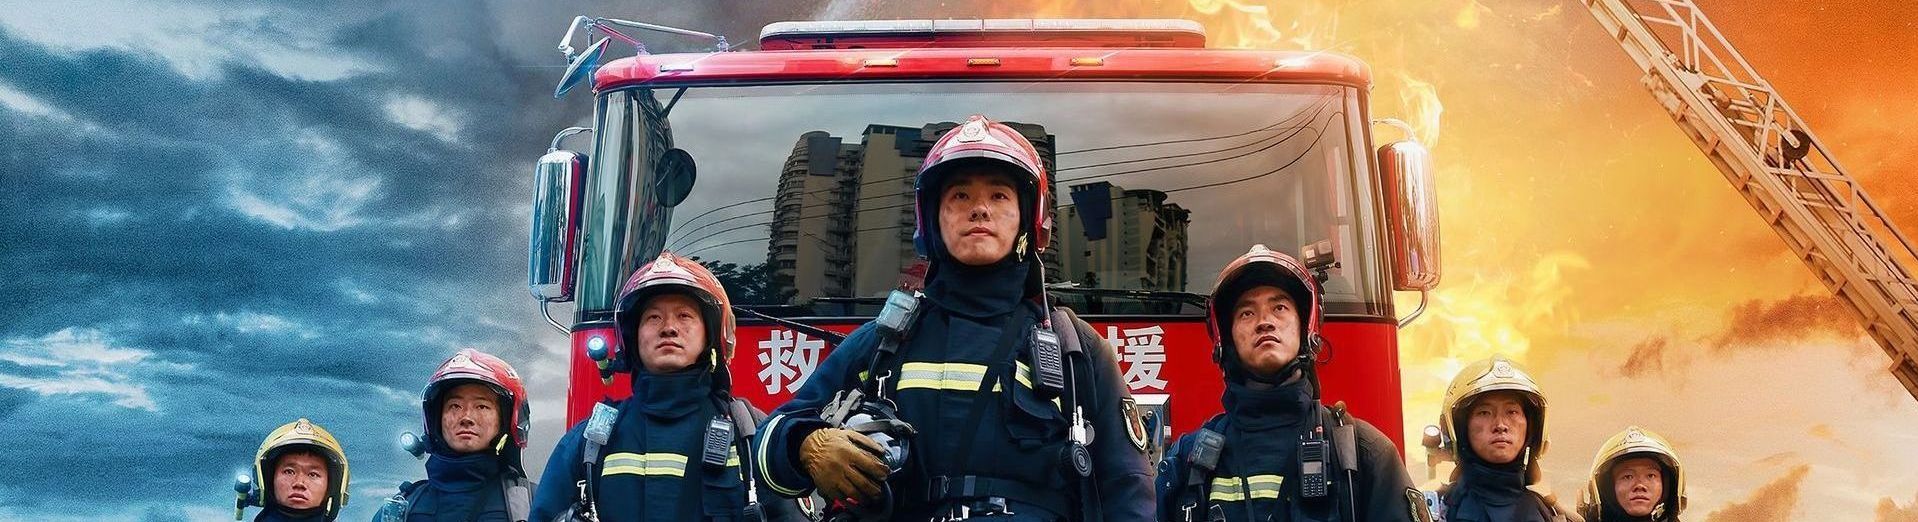 Frontline Shanghai episode list. Chinees firefighters at work in Shanghai.